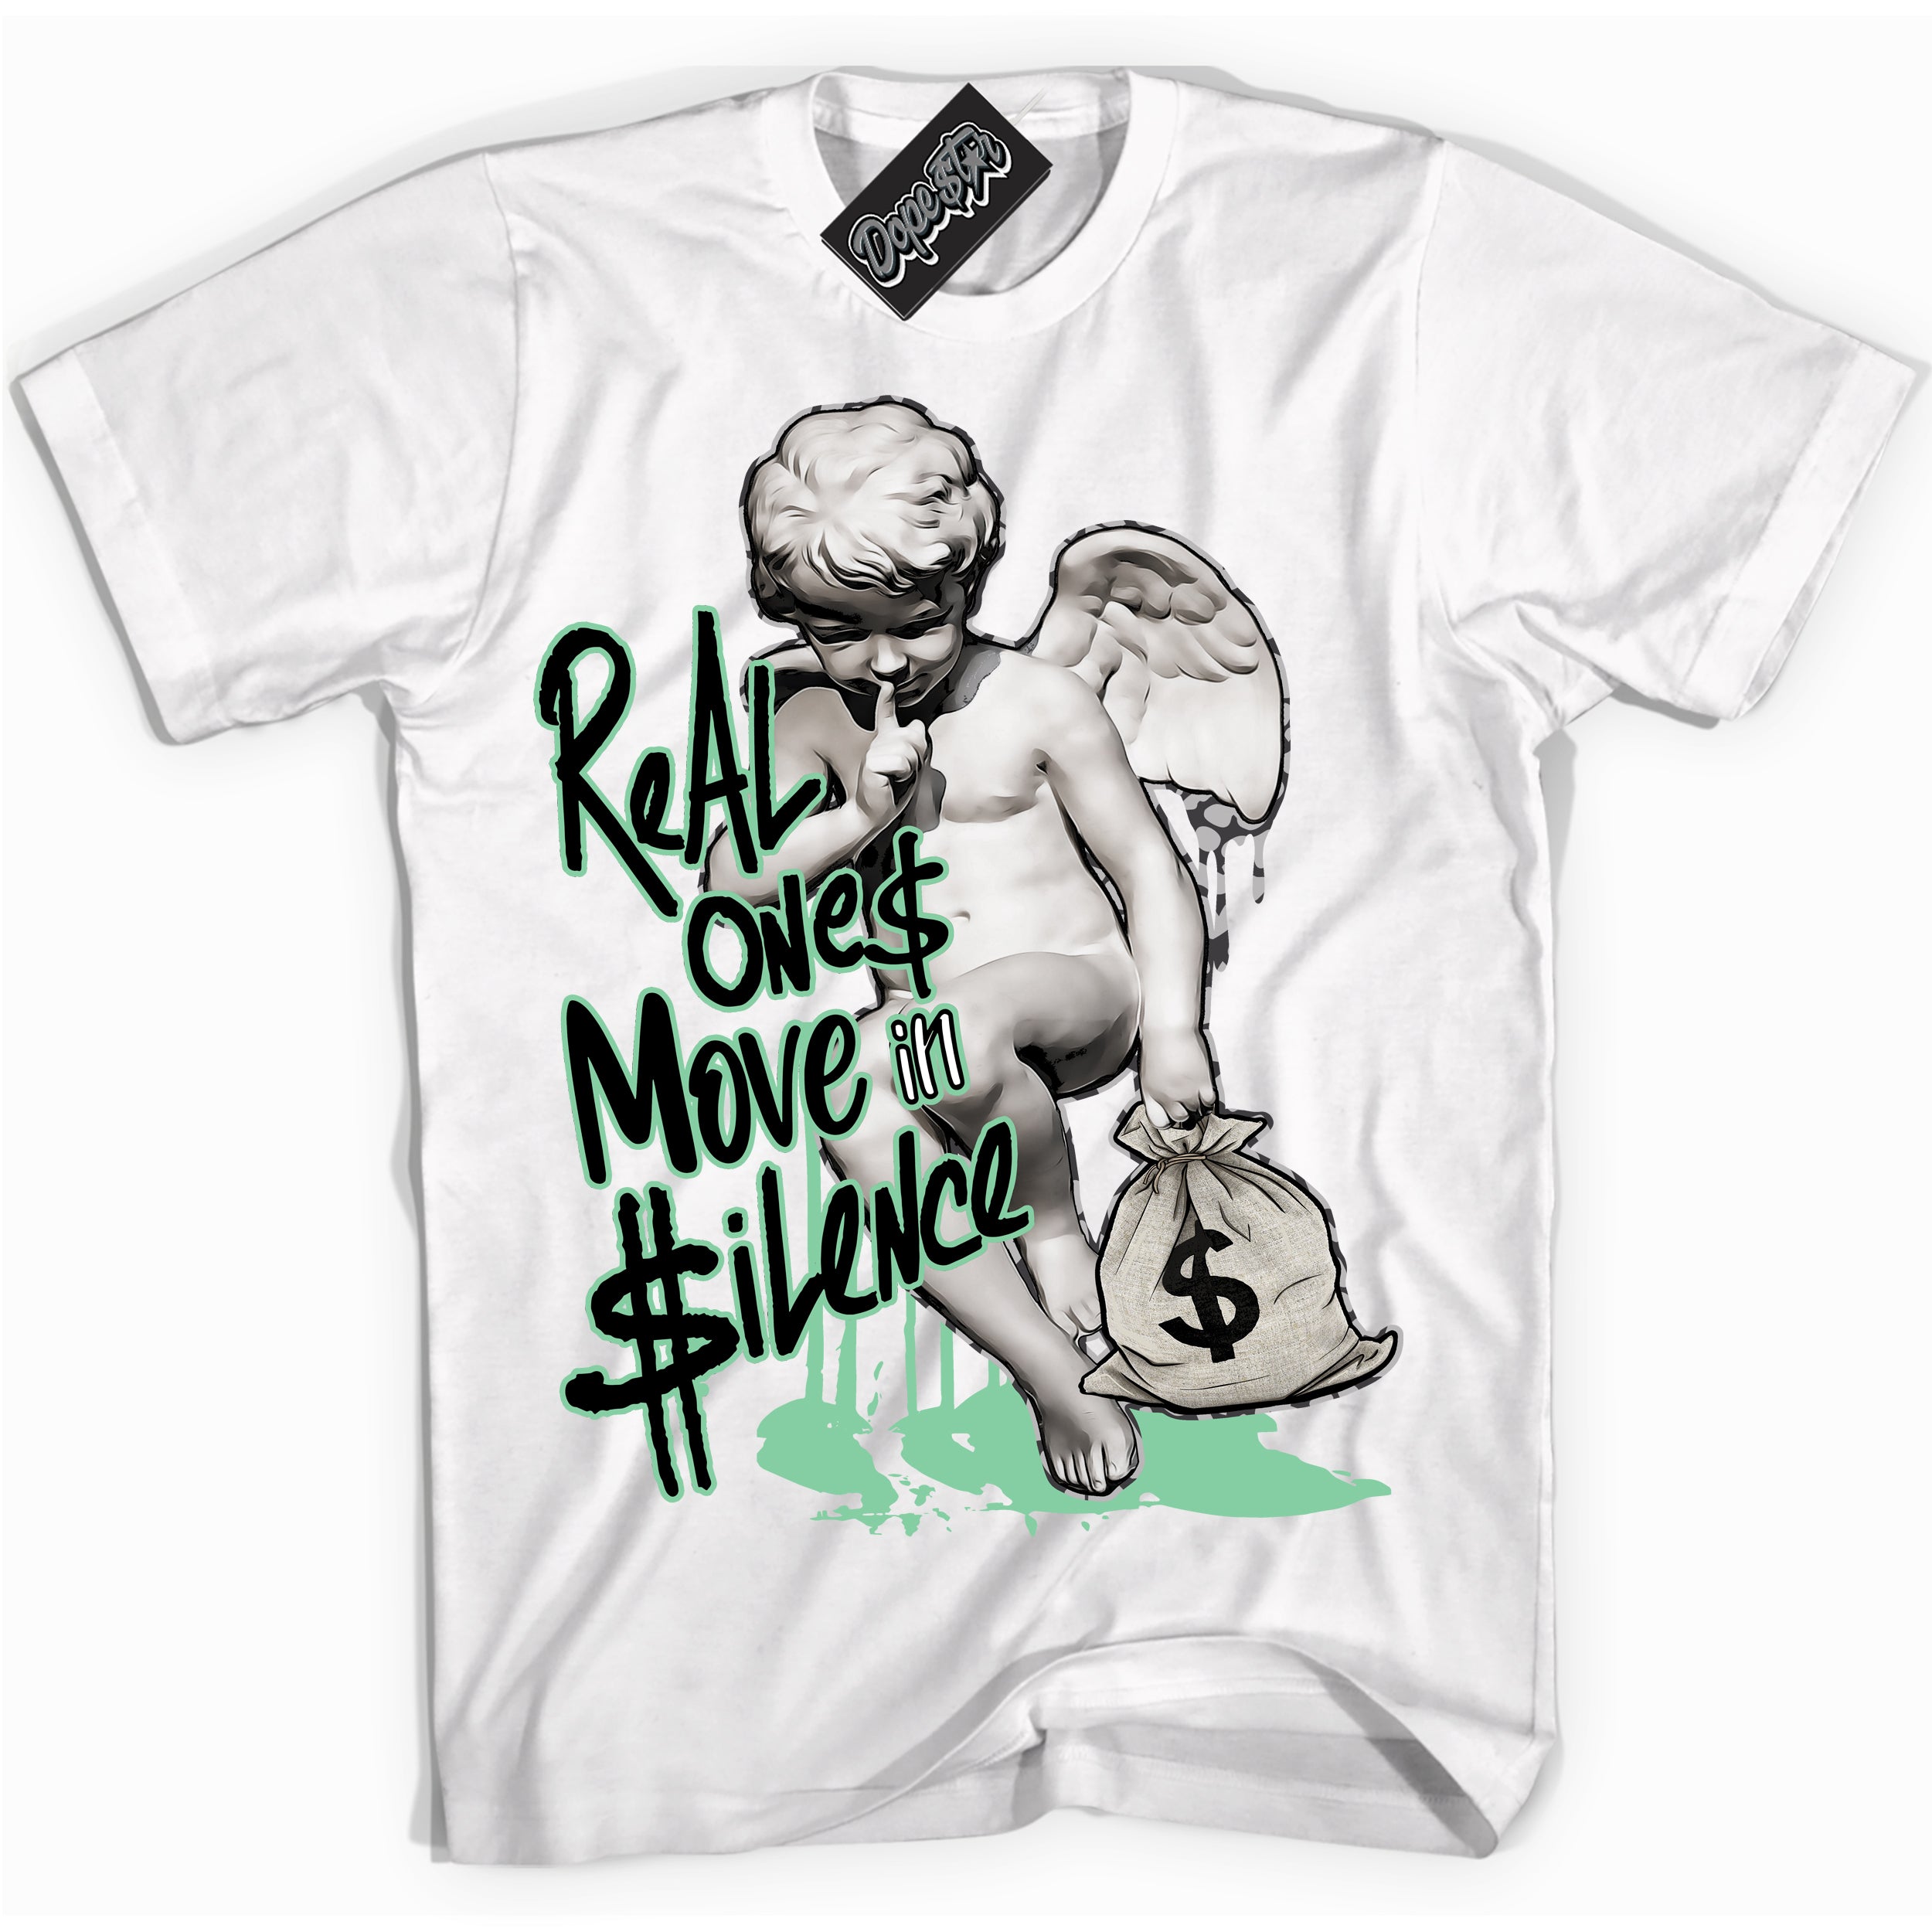 Cool White graphic tee with “ Real Ones Cherub ” design, that perfectly matches Green Glow 3s sneakers 